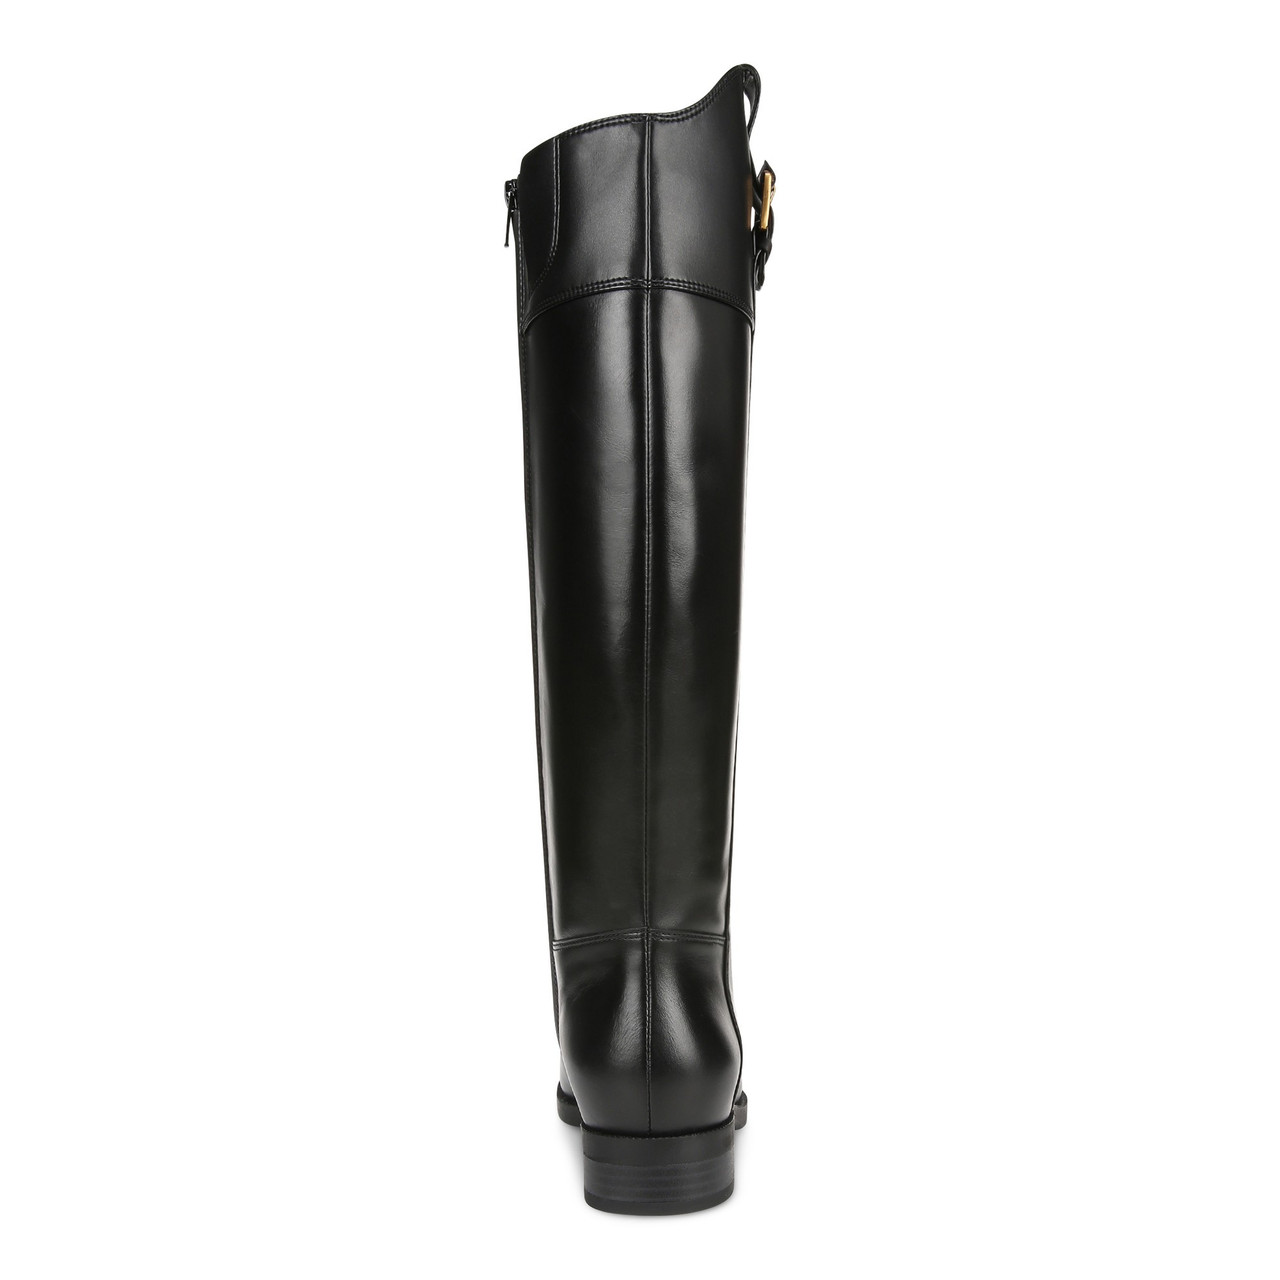 Vionic Phillipa Women's High Shaft Boots - Water Repellent Leather